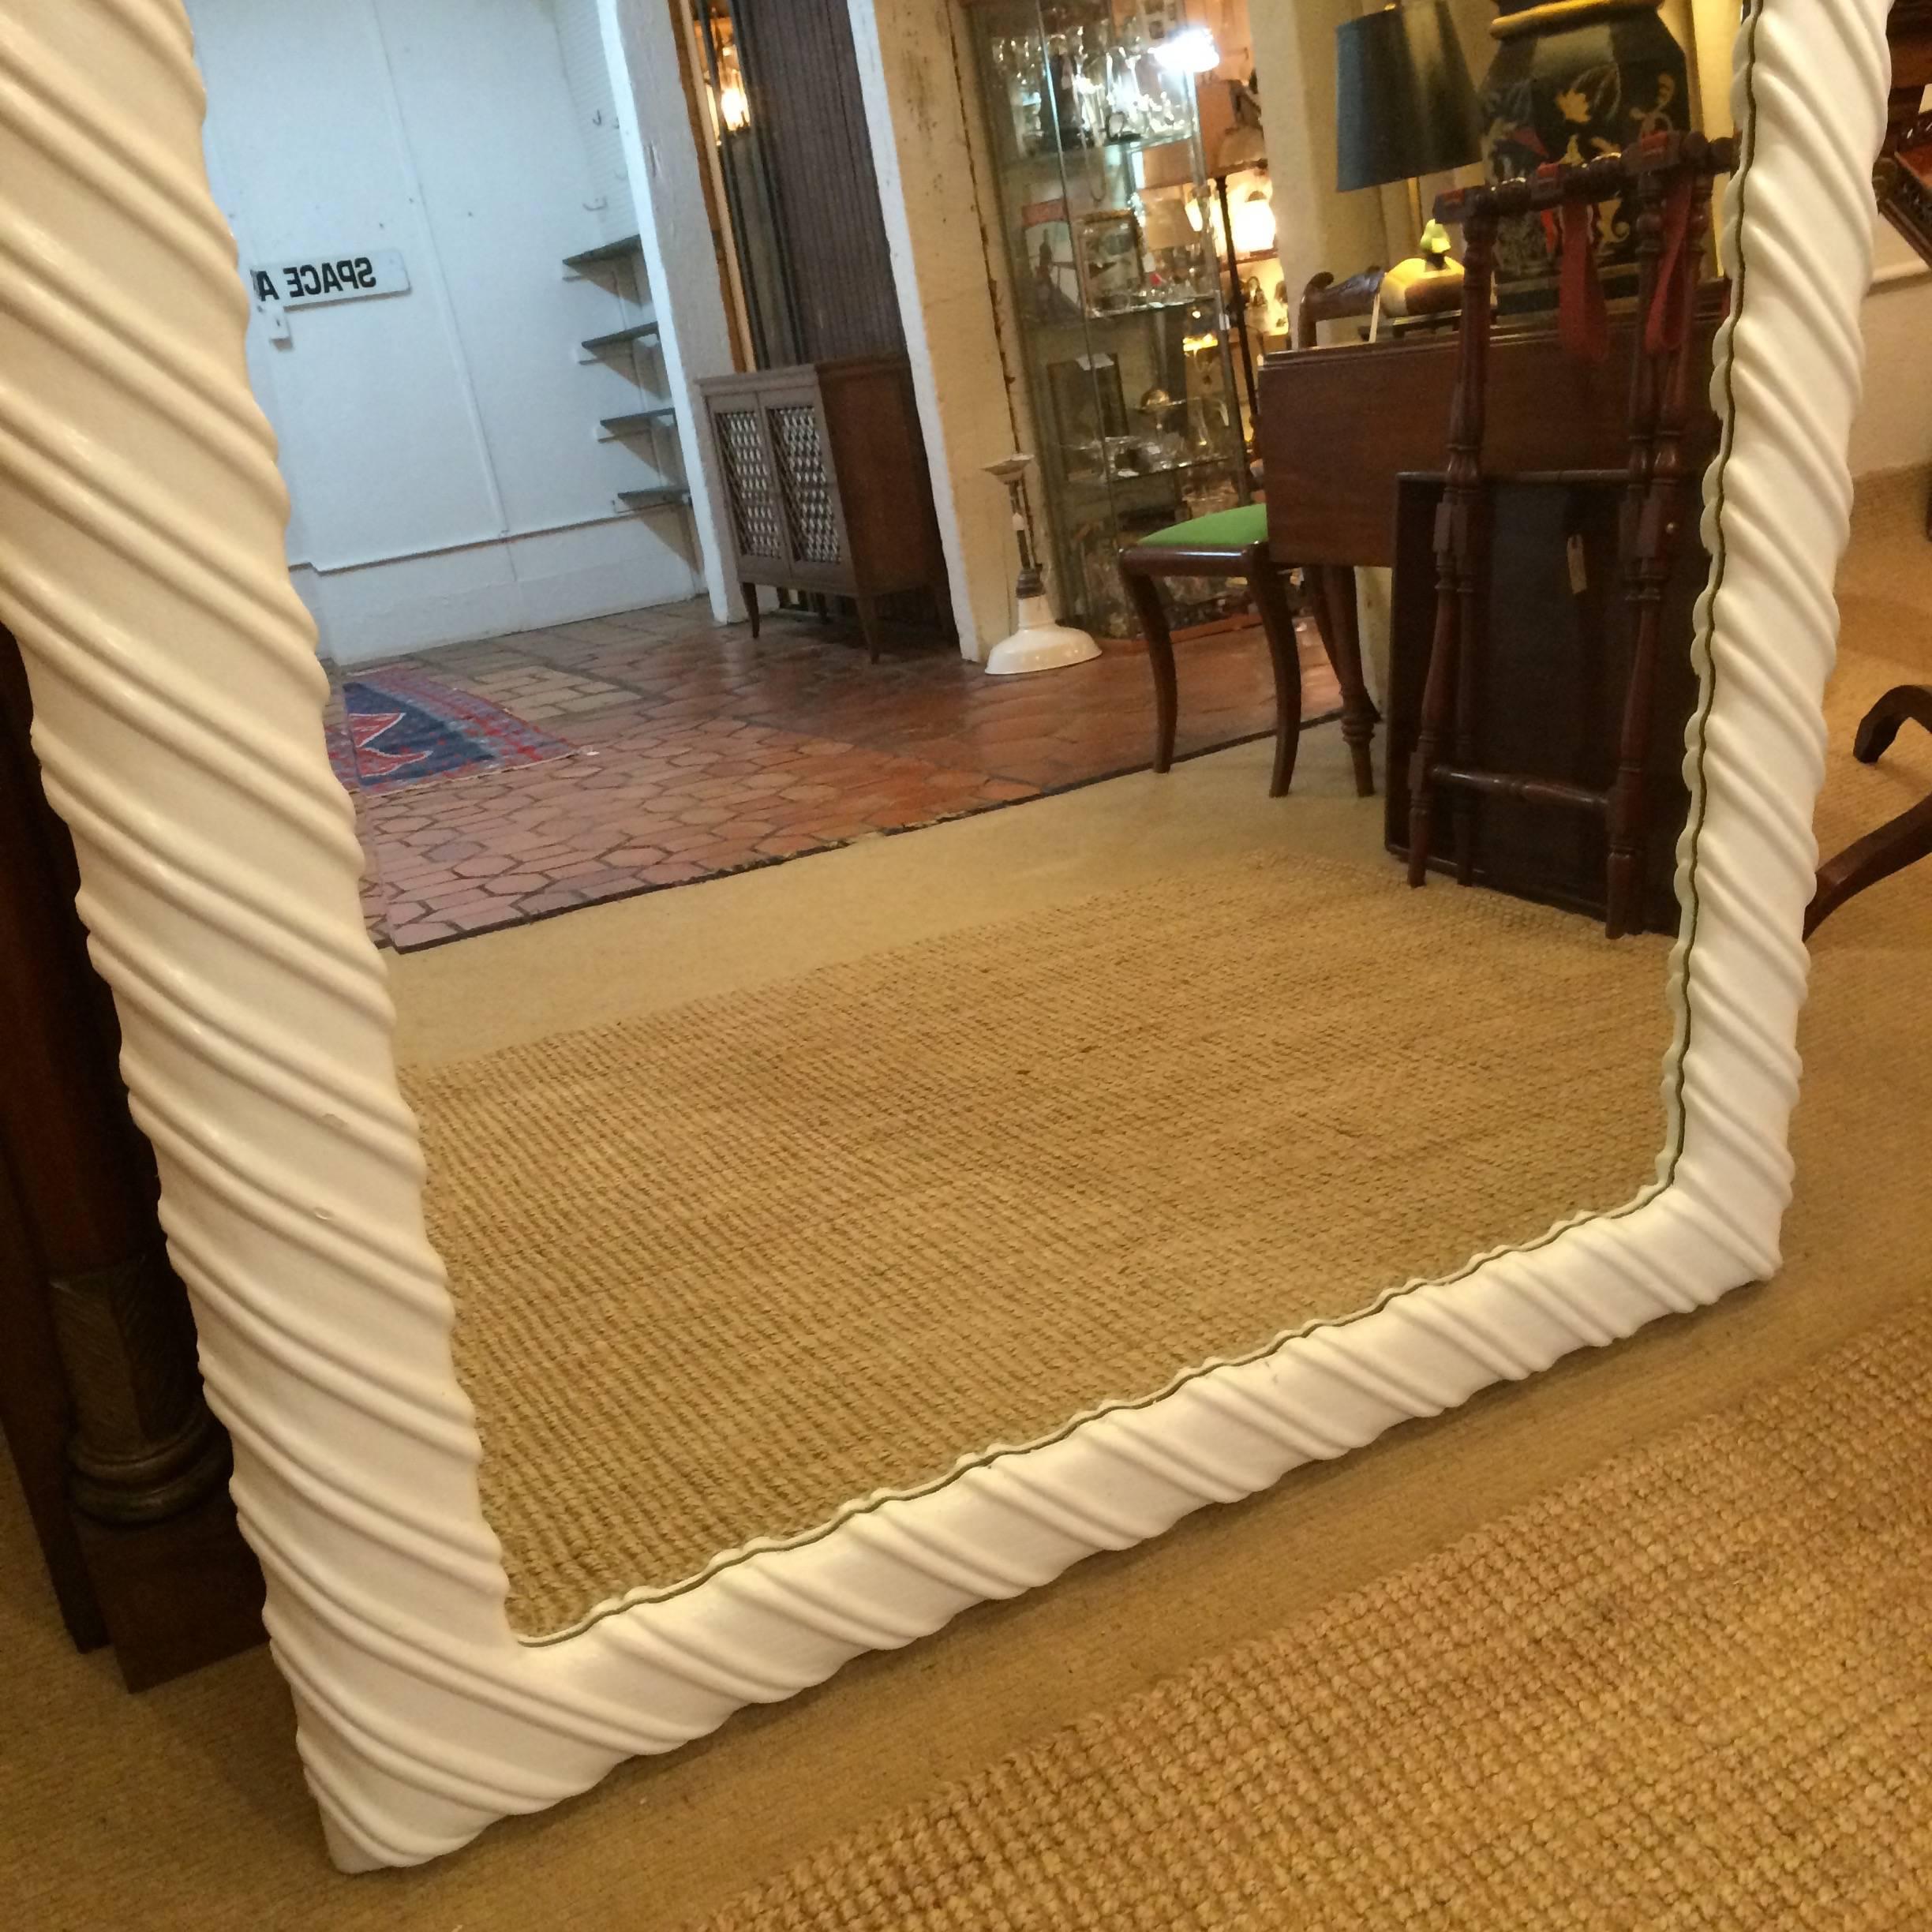 Fabulous large bevelled mirror with a chunky white frame having raised diagonal stripes to give it a graphic contemporary look.

GG